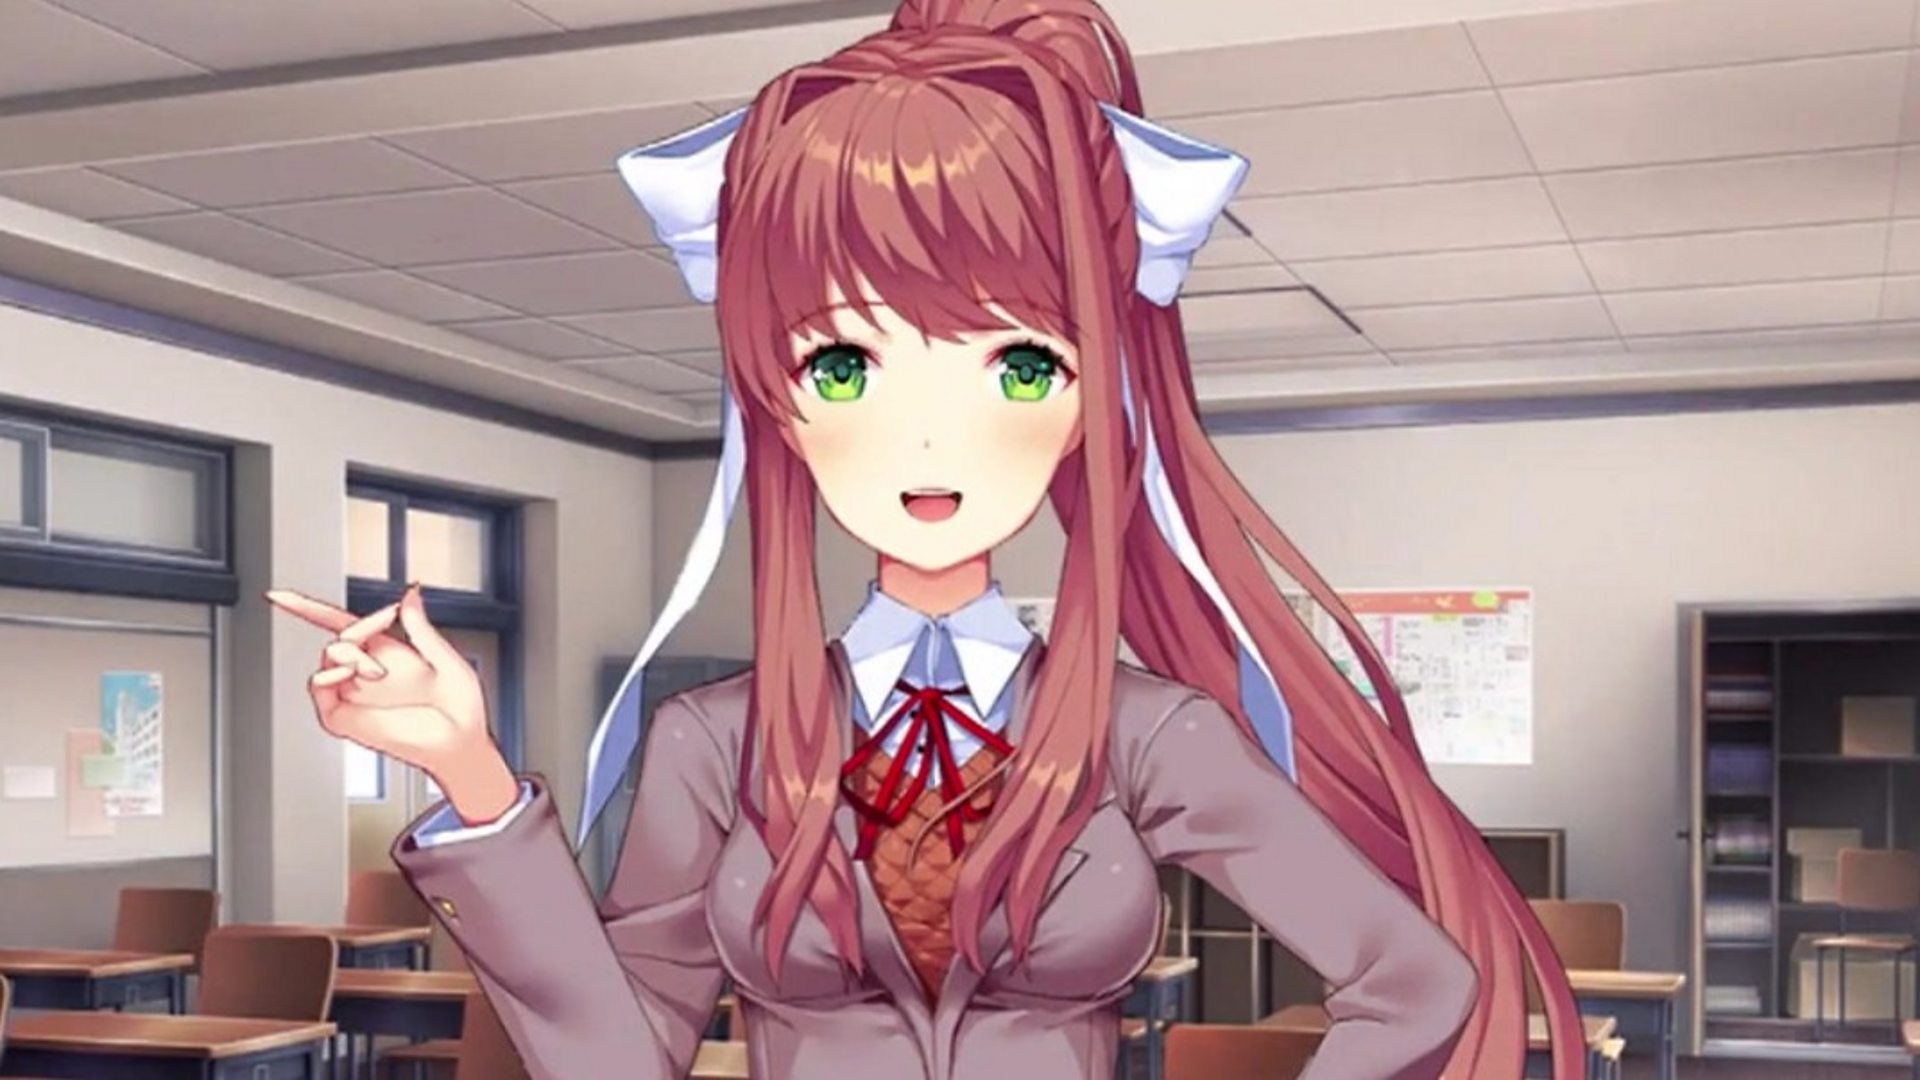 Doki Doki: Warnings over suicide-themed video game - BBC News